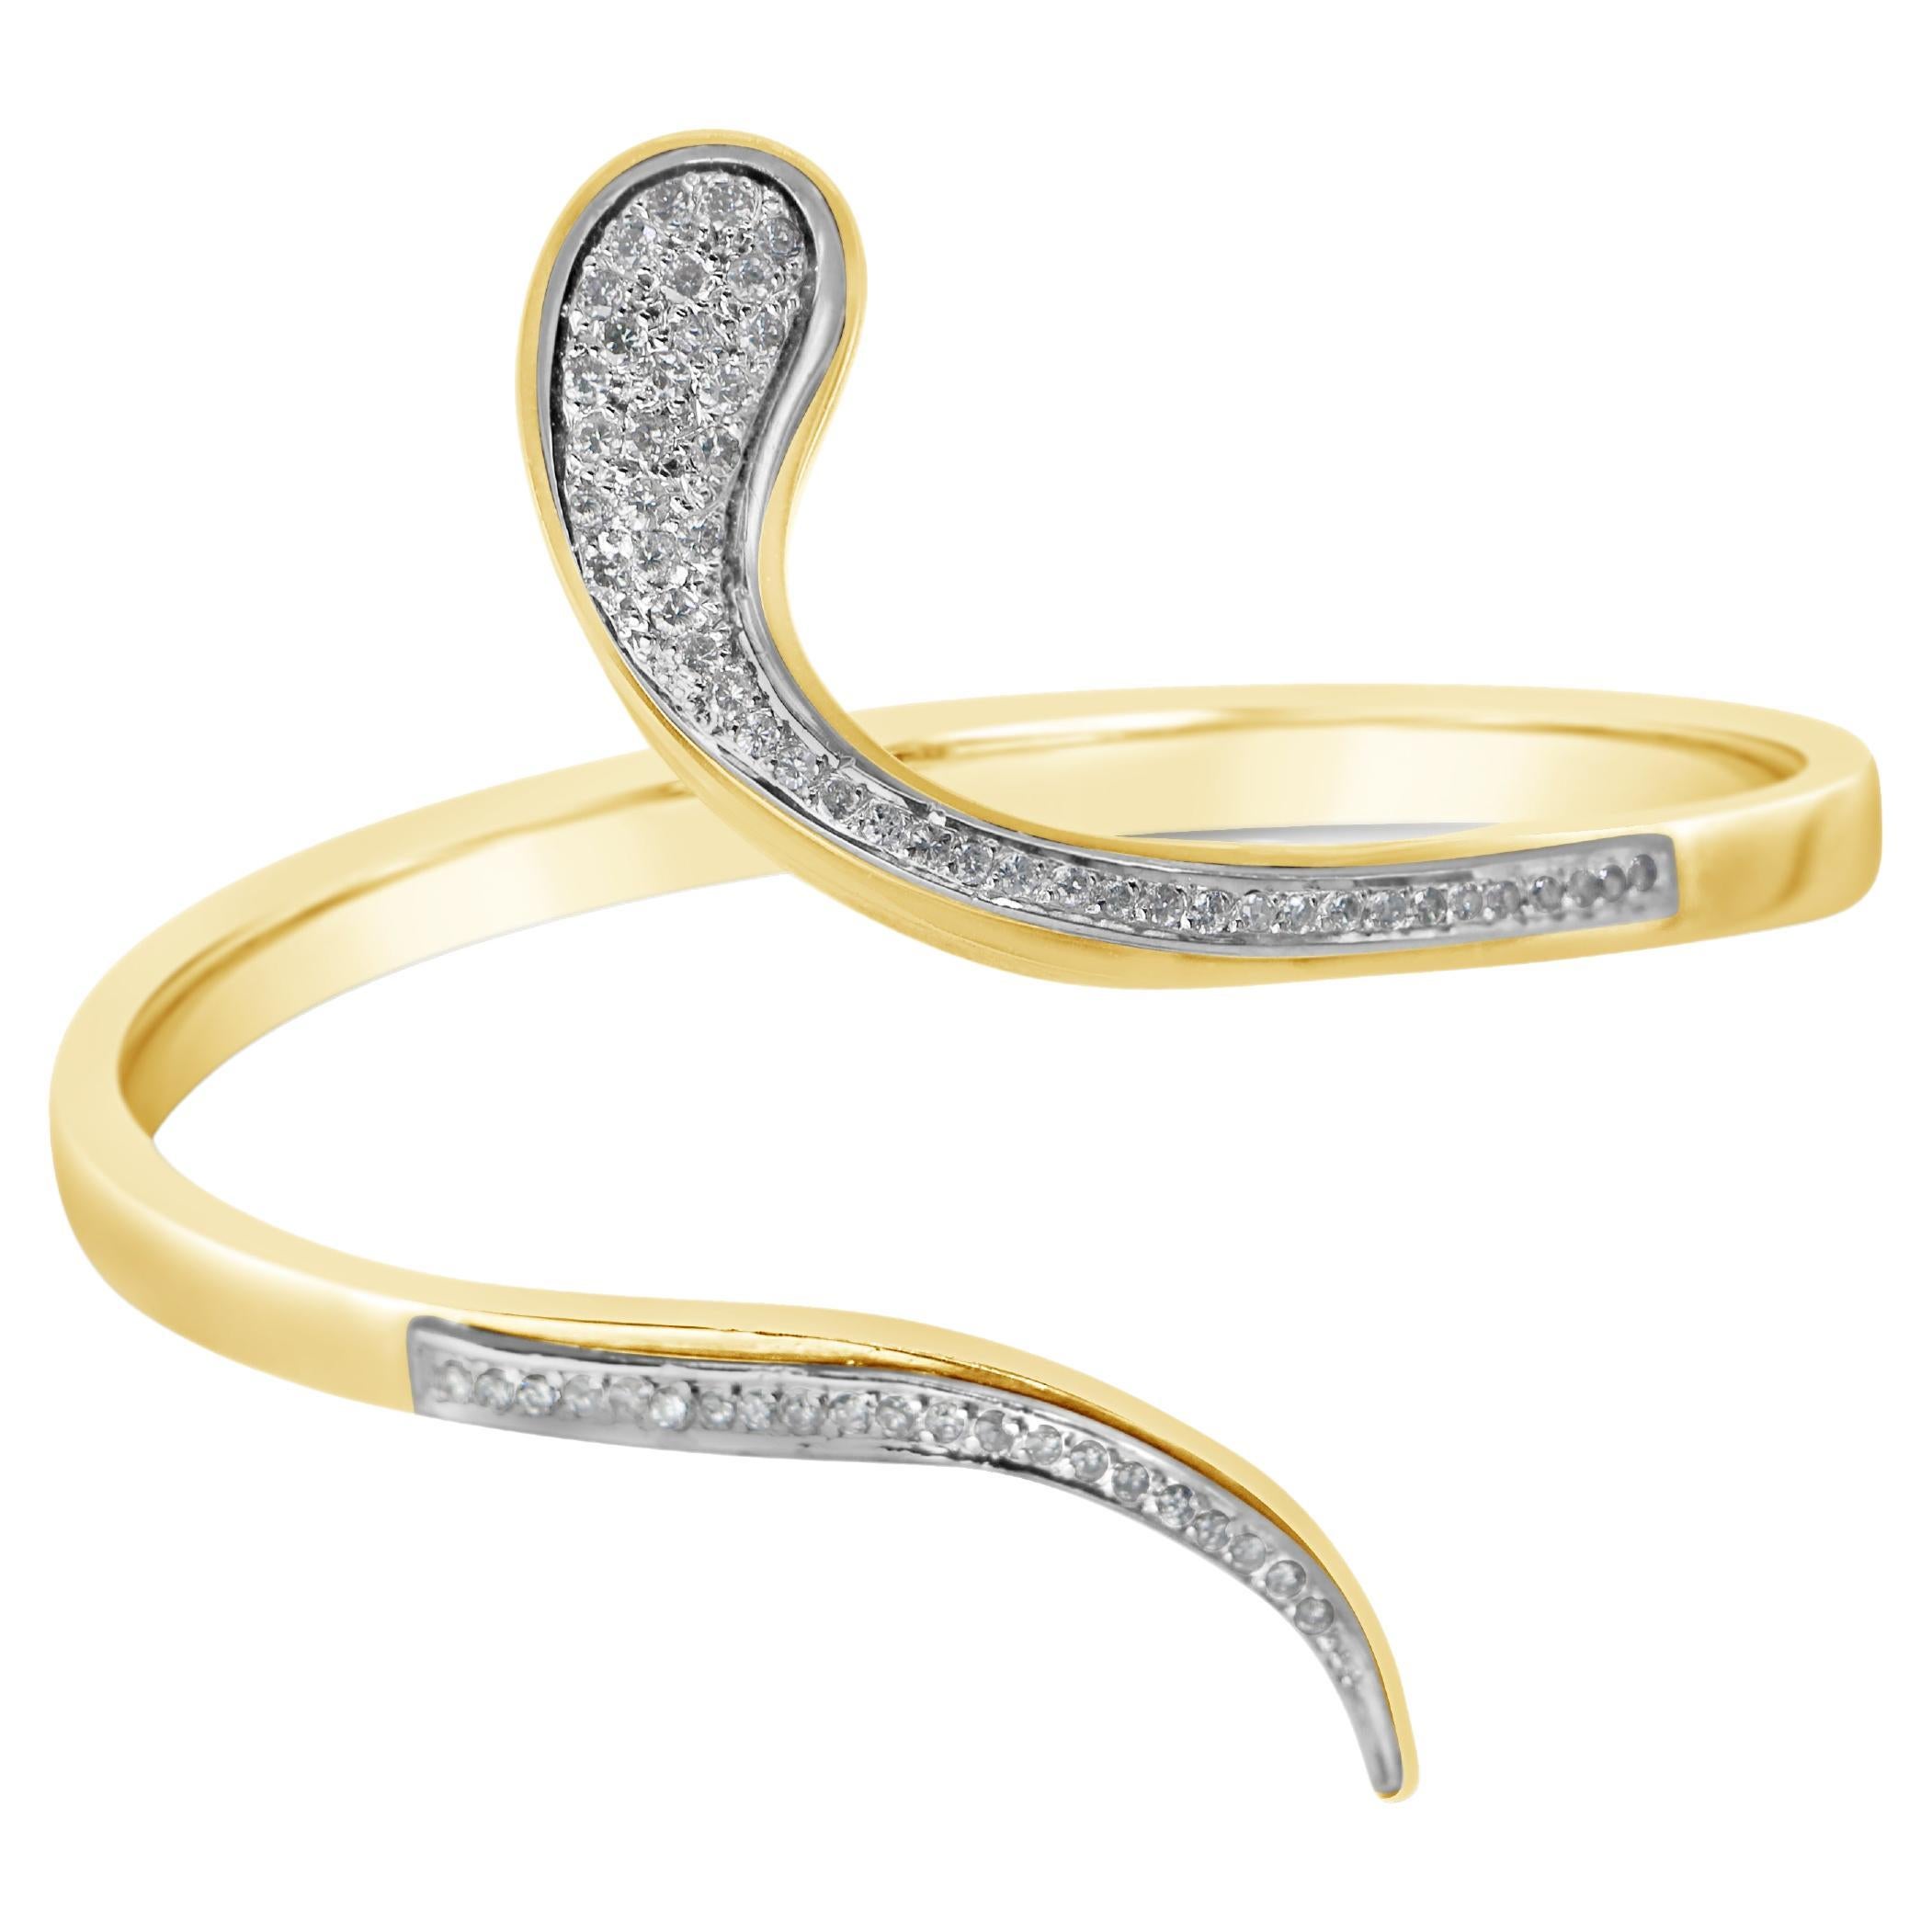 Open Bangle Snake Bracelet in 18Kt Yellow and White Gold Diamonds Pave Setting